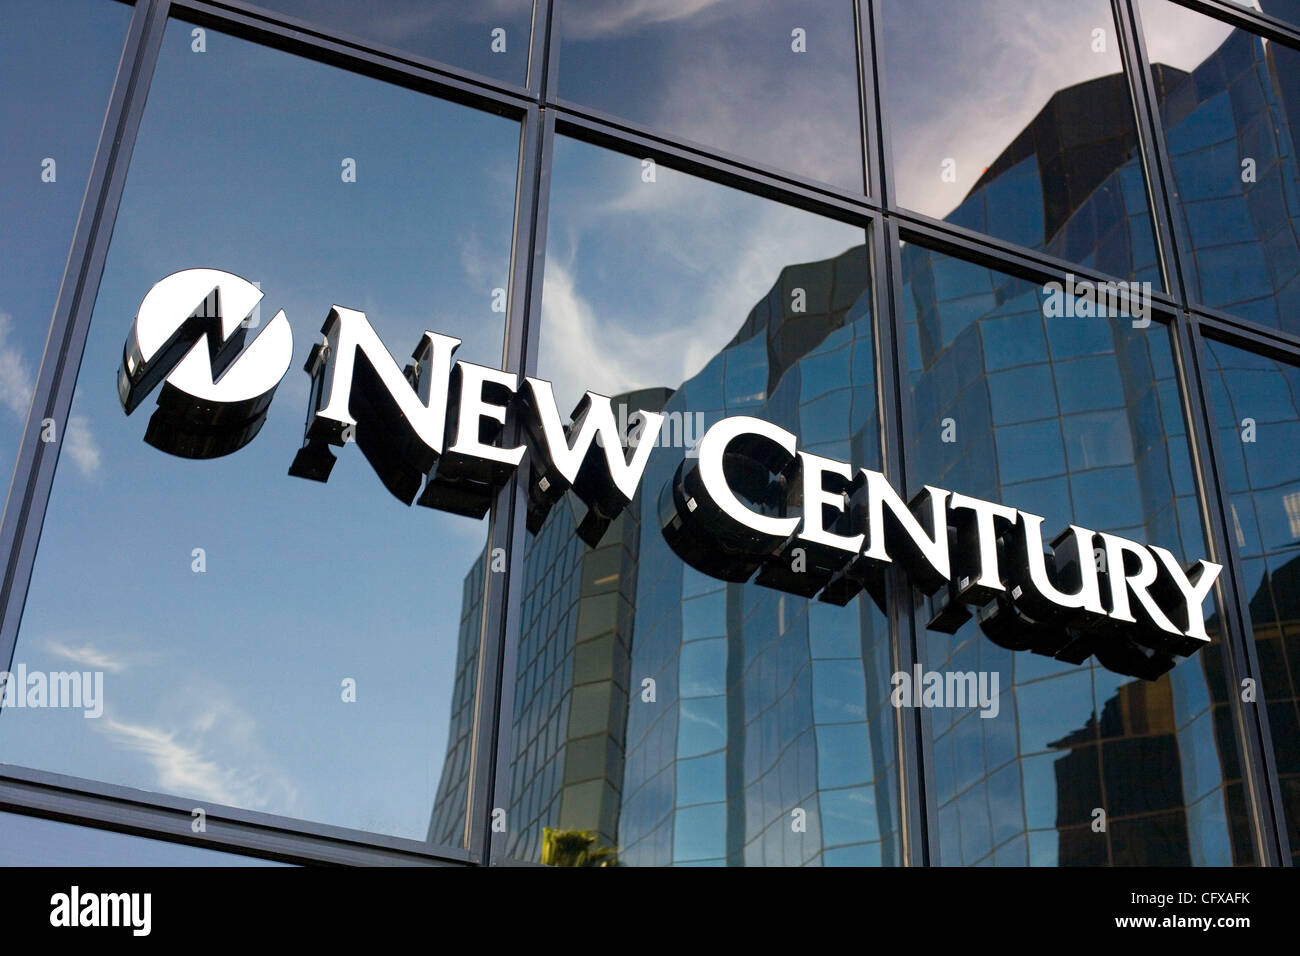 The Solution of New Century Financial Corporation